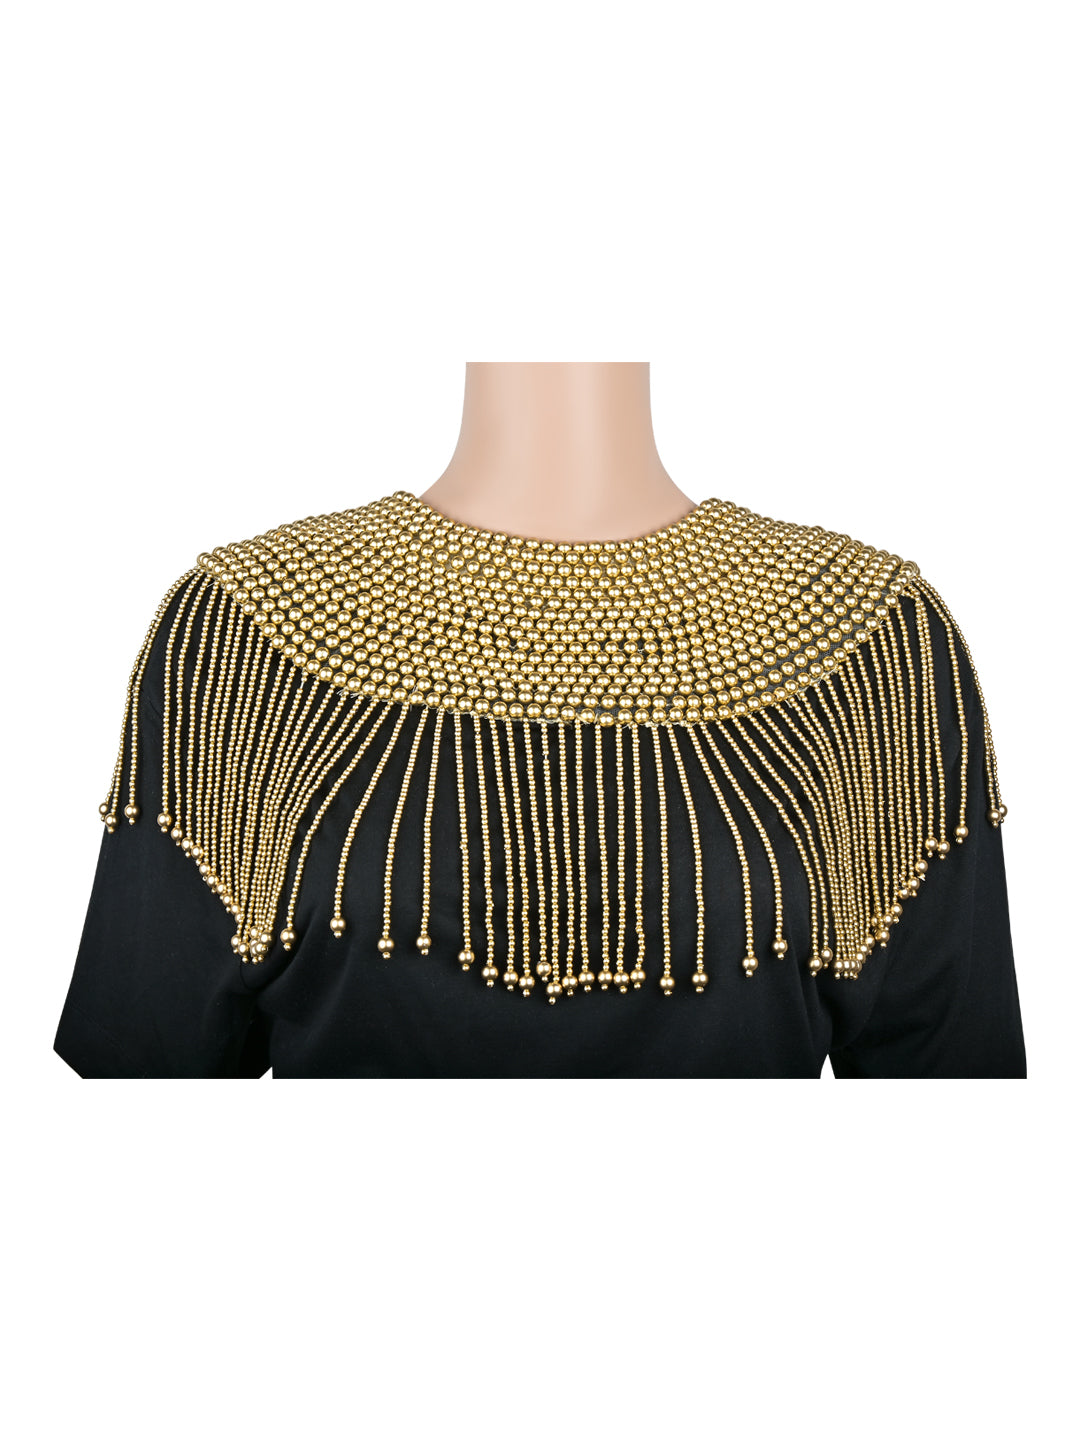 Crafted with the finest materials and exquisite craftsmanship, this body chain cape is a statement piece that exudes luxury and elegance.